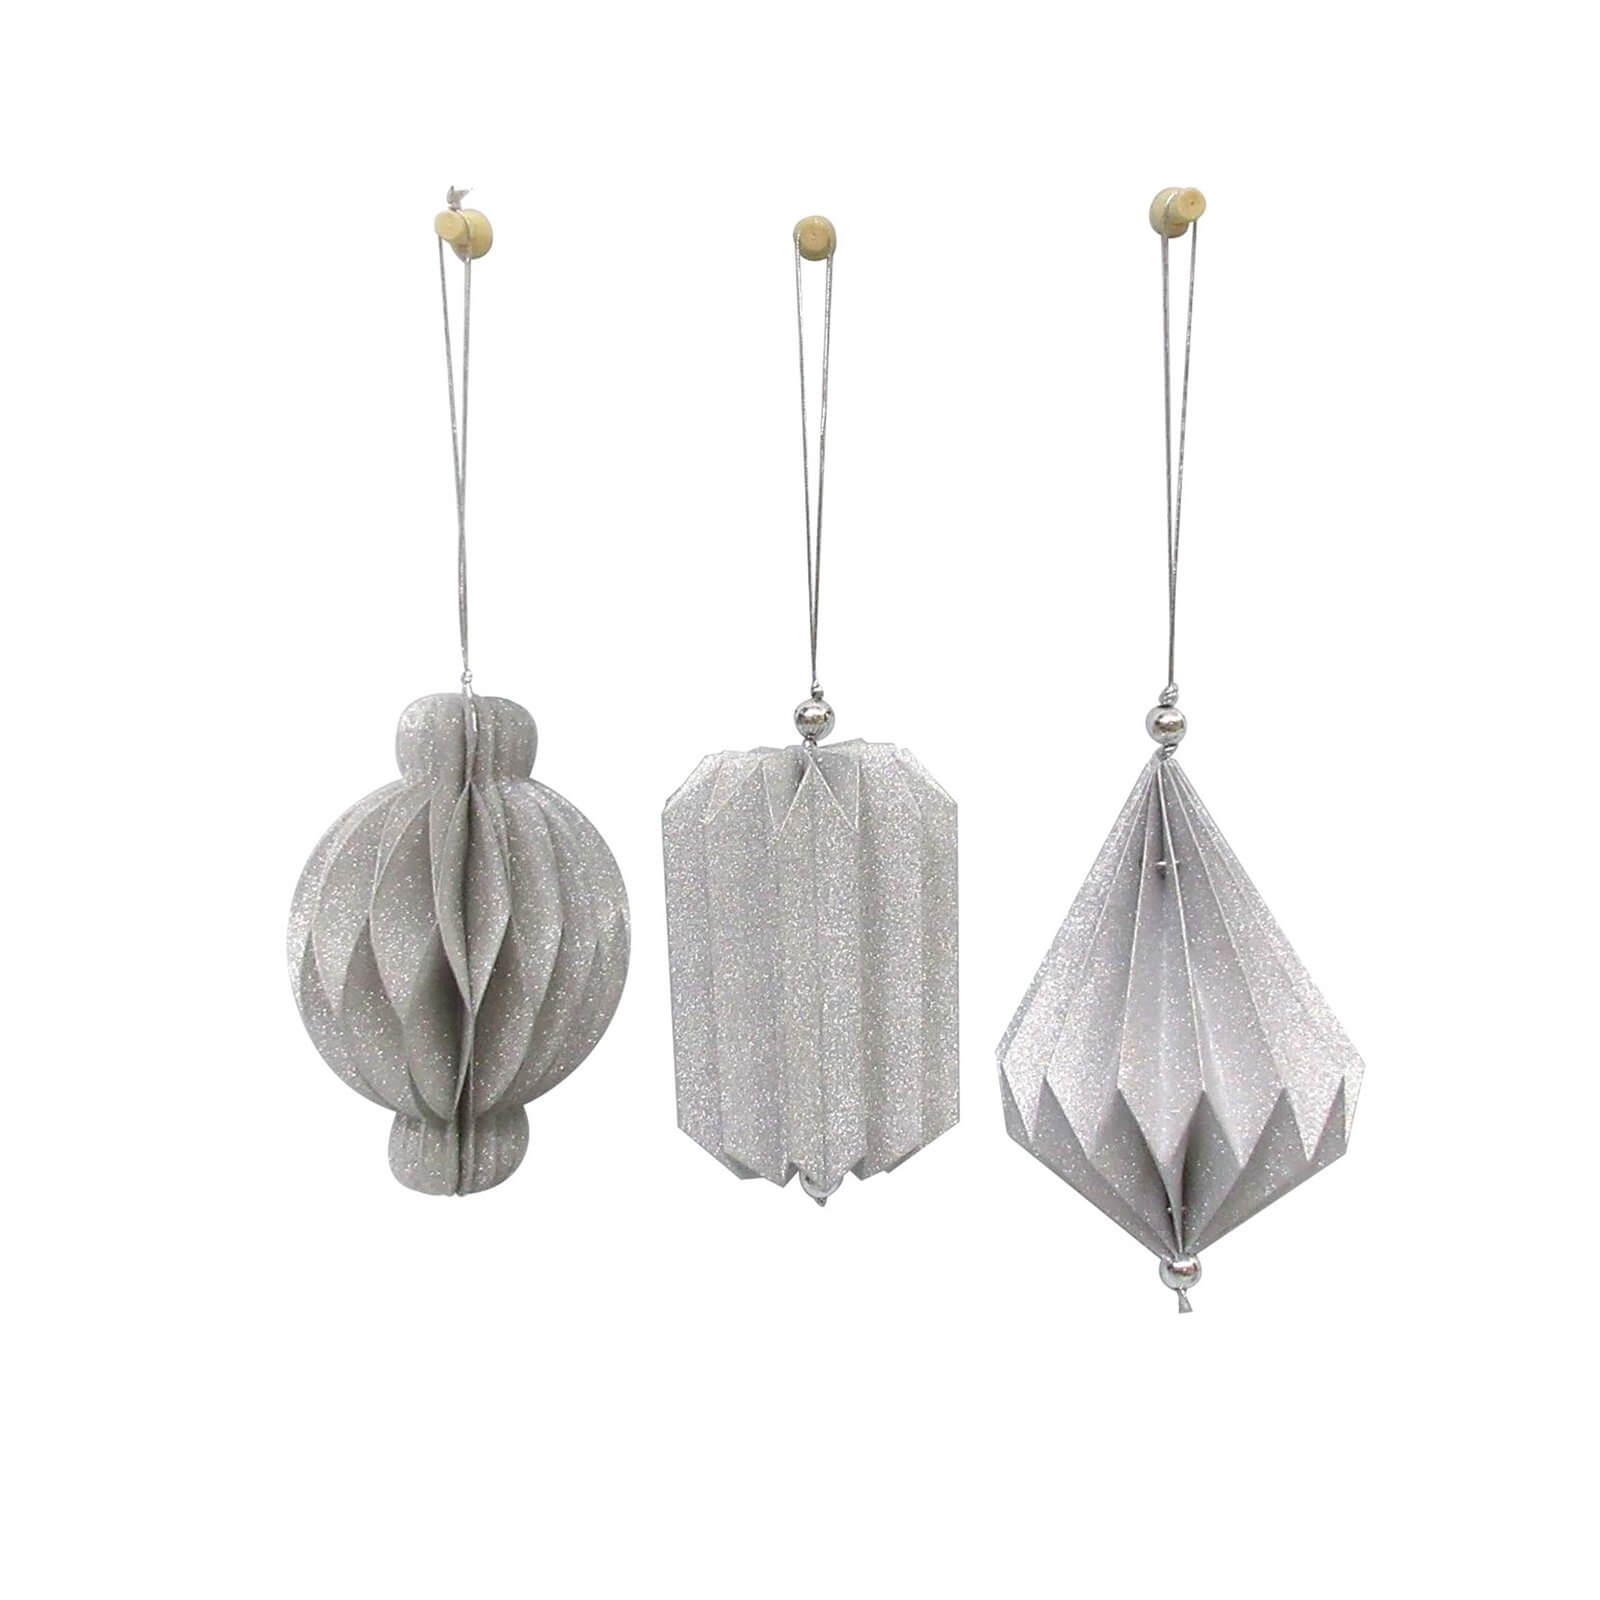 Pack of 3 Silver Concertina Tree Decorations - Large